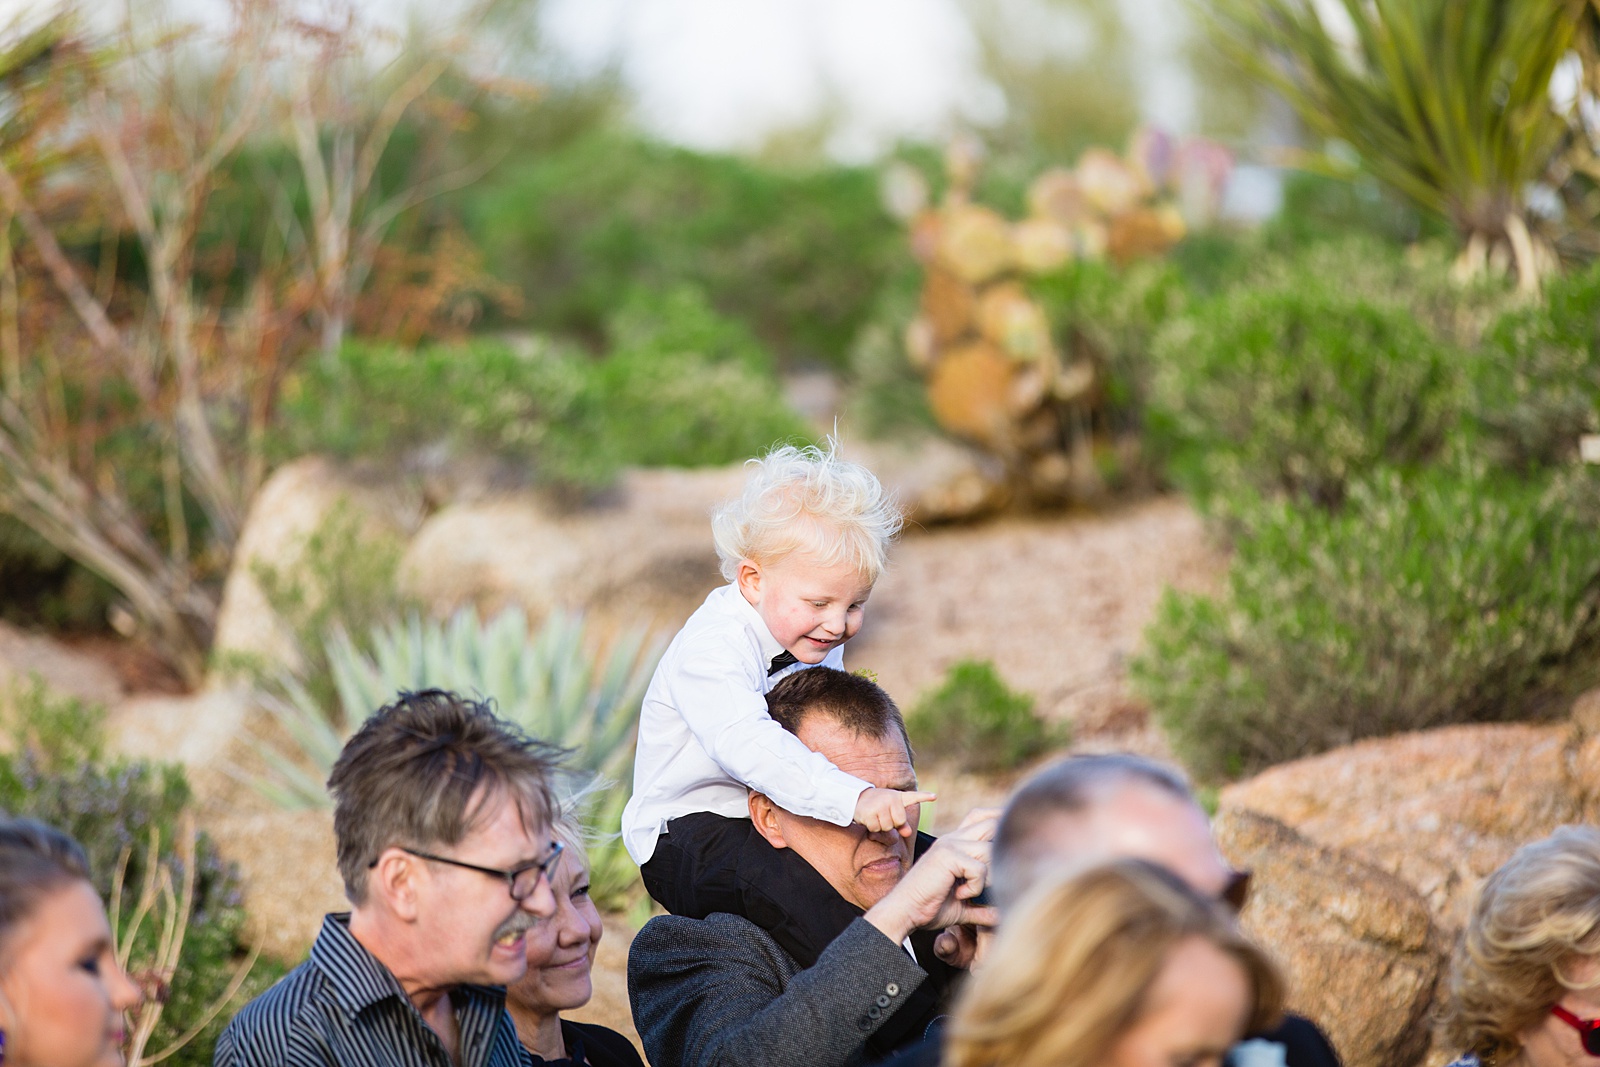 Wedding guests watching the wedding ceremony at Troon North by Scottsdale wedding photographer PMA Photography.